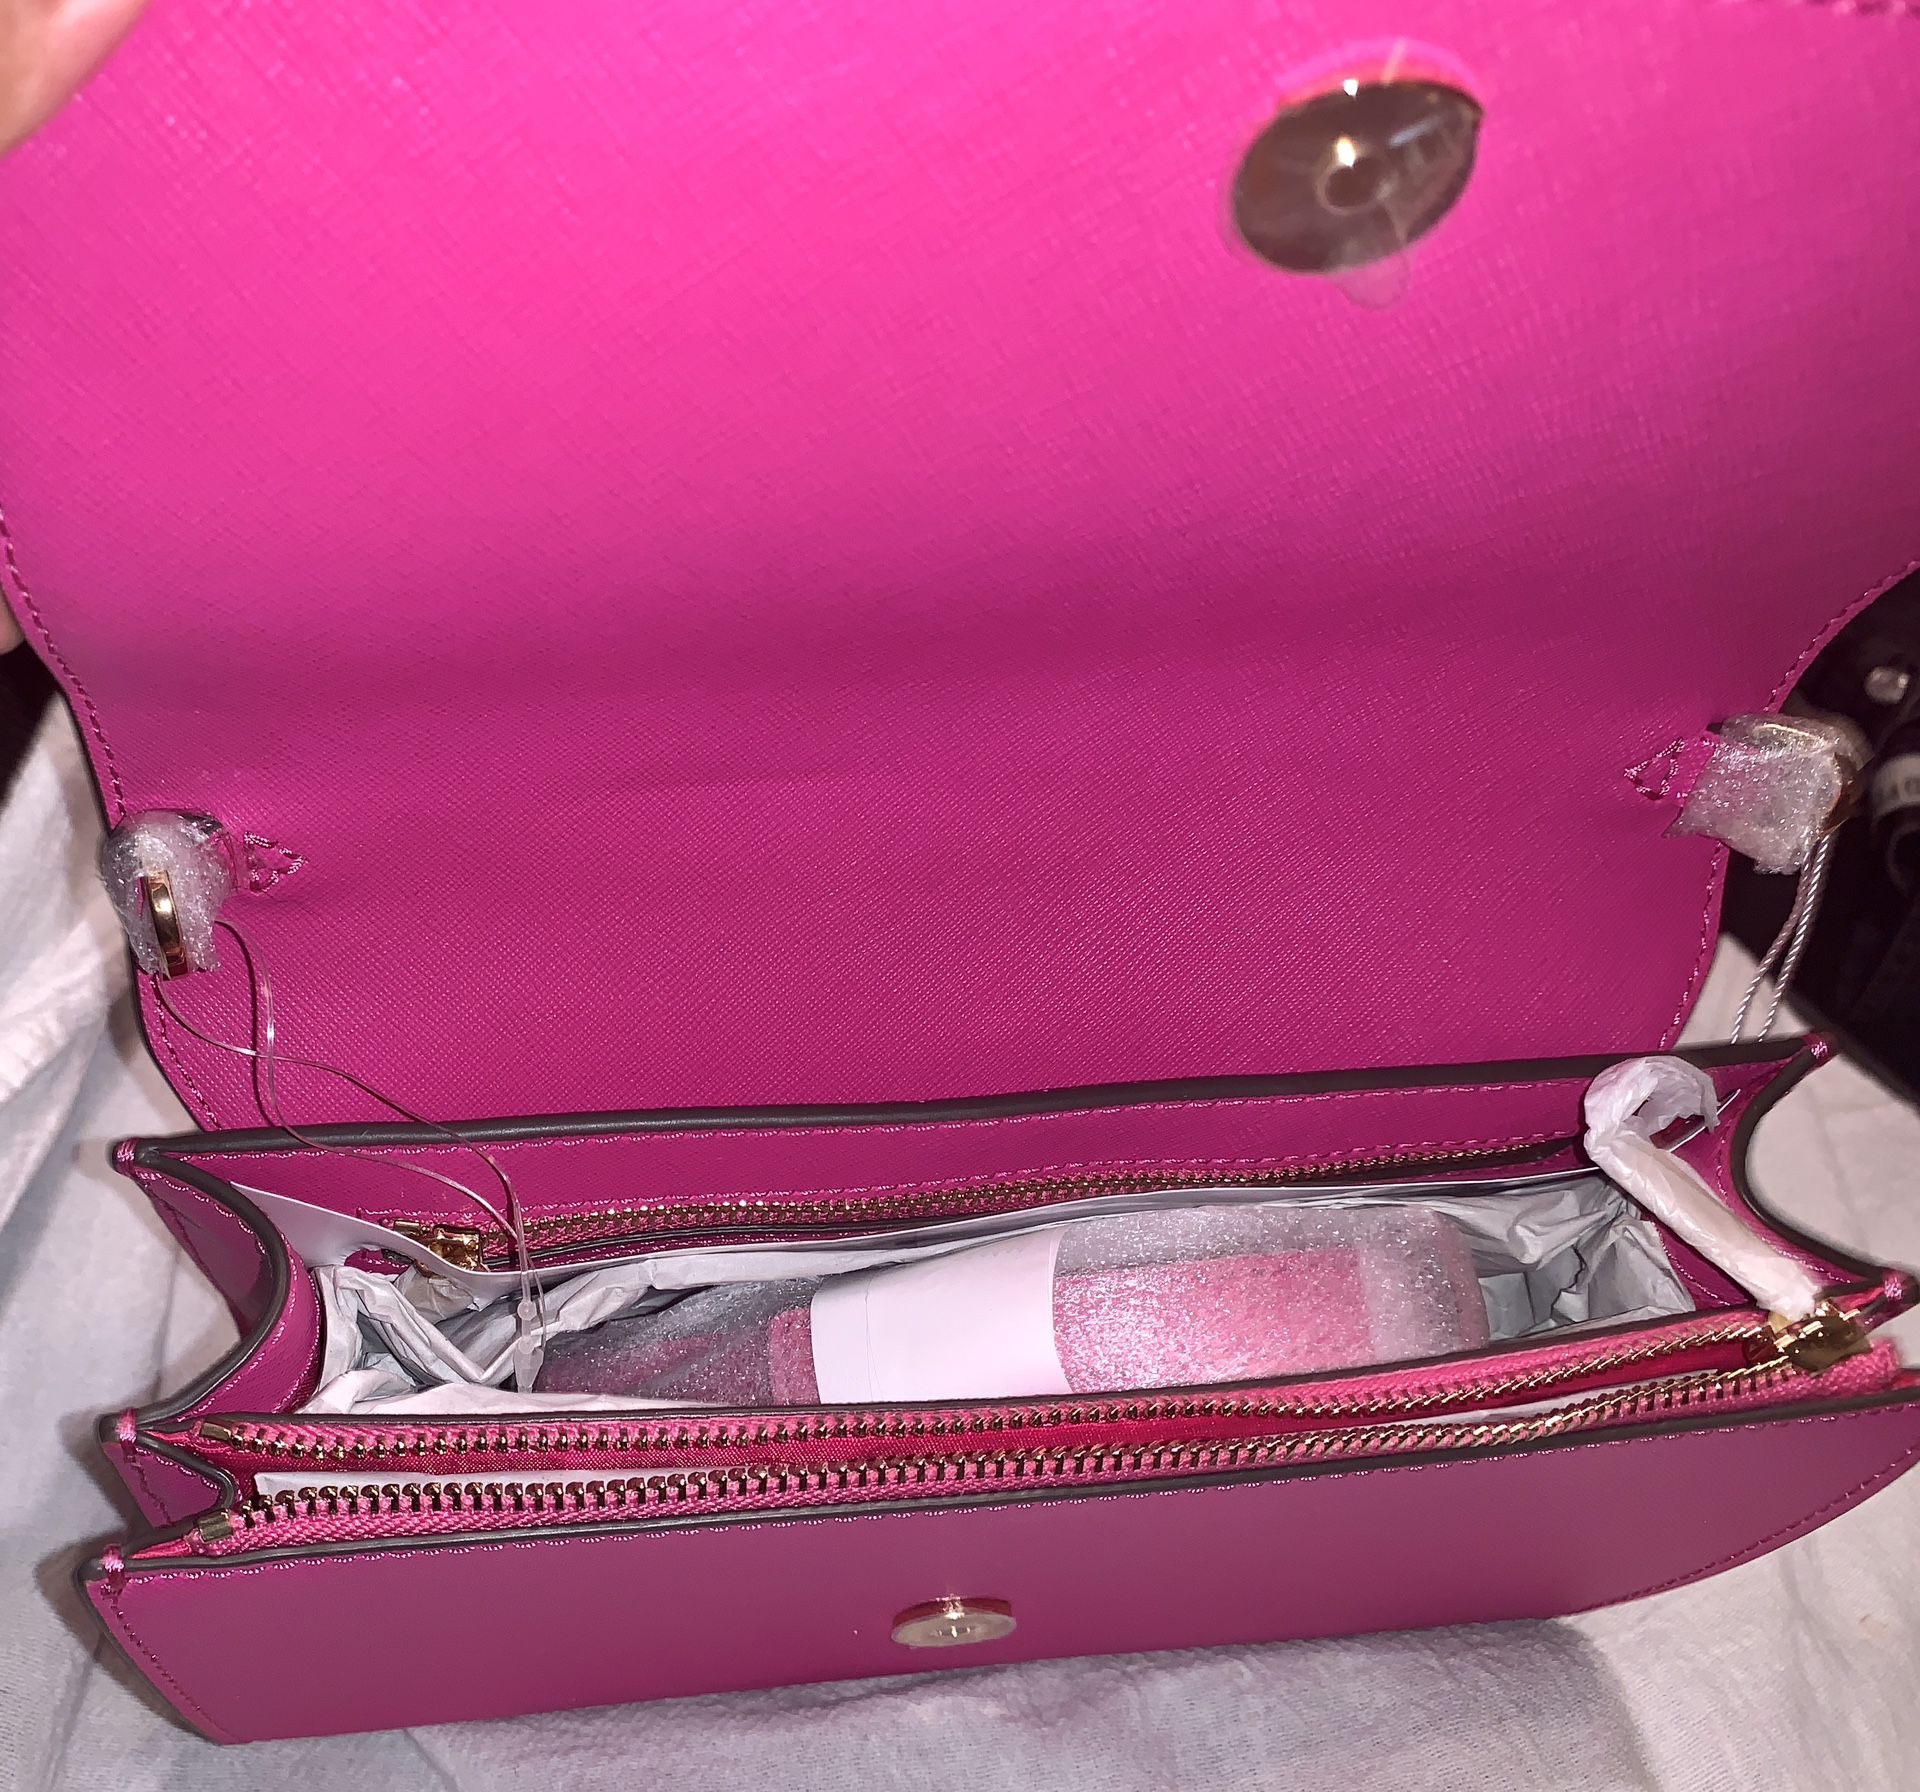 Hot Pink Tory Burch Crossbody/ Clutch Bag for Sale in Atwater, CA - OfferUp